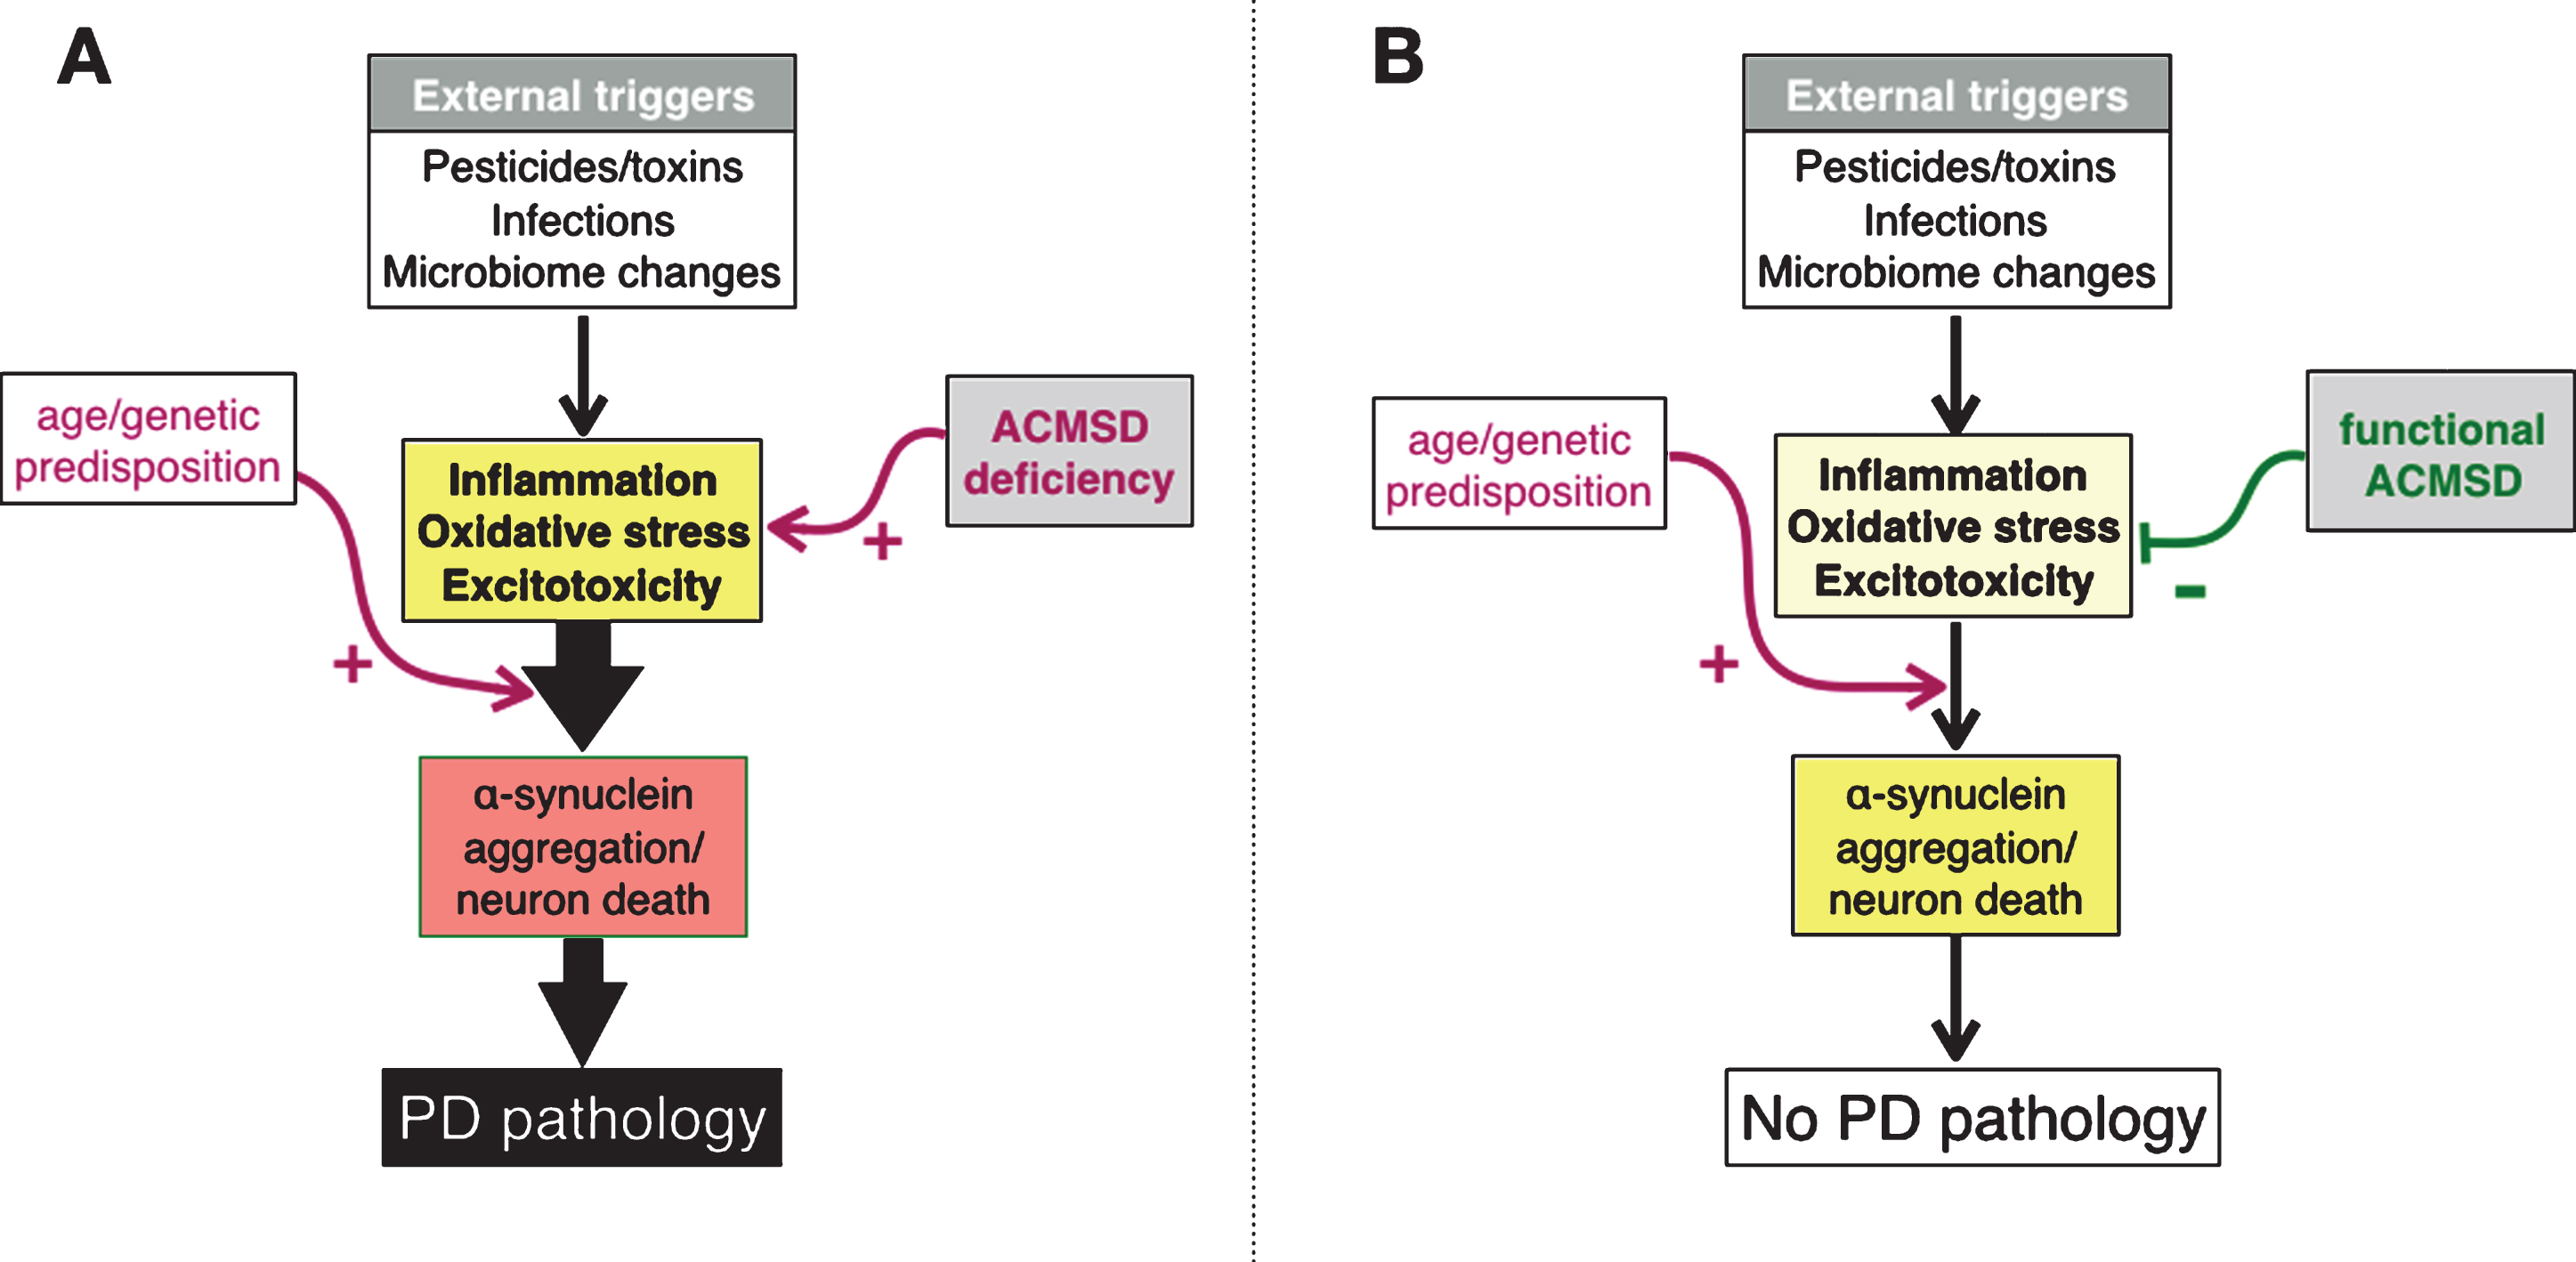 A. Schematic diagram depicting the interrelationships between putative triggers of Parkinson’s disease (PD) and three pathogenetic mechanism that are believed to contribute to the development of neuropathology. We suggest that these events are enhanced by aging. In this model, we propose that ACMSD activity can reduce the likelihood that potential disease triggers actually lead to PD. B. Physiological state.